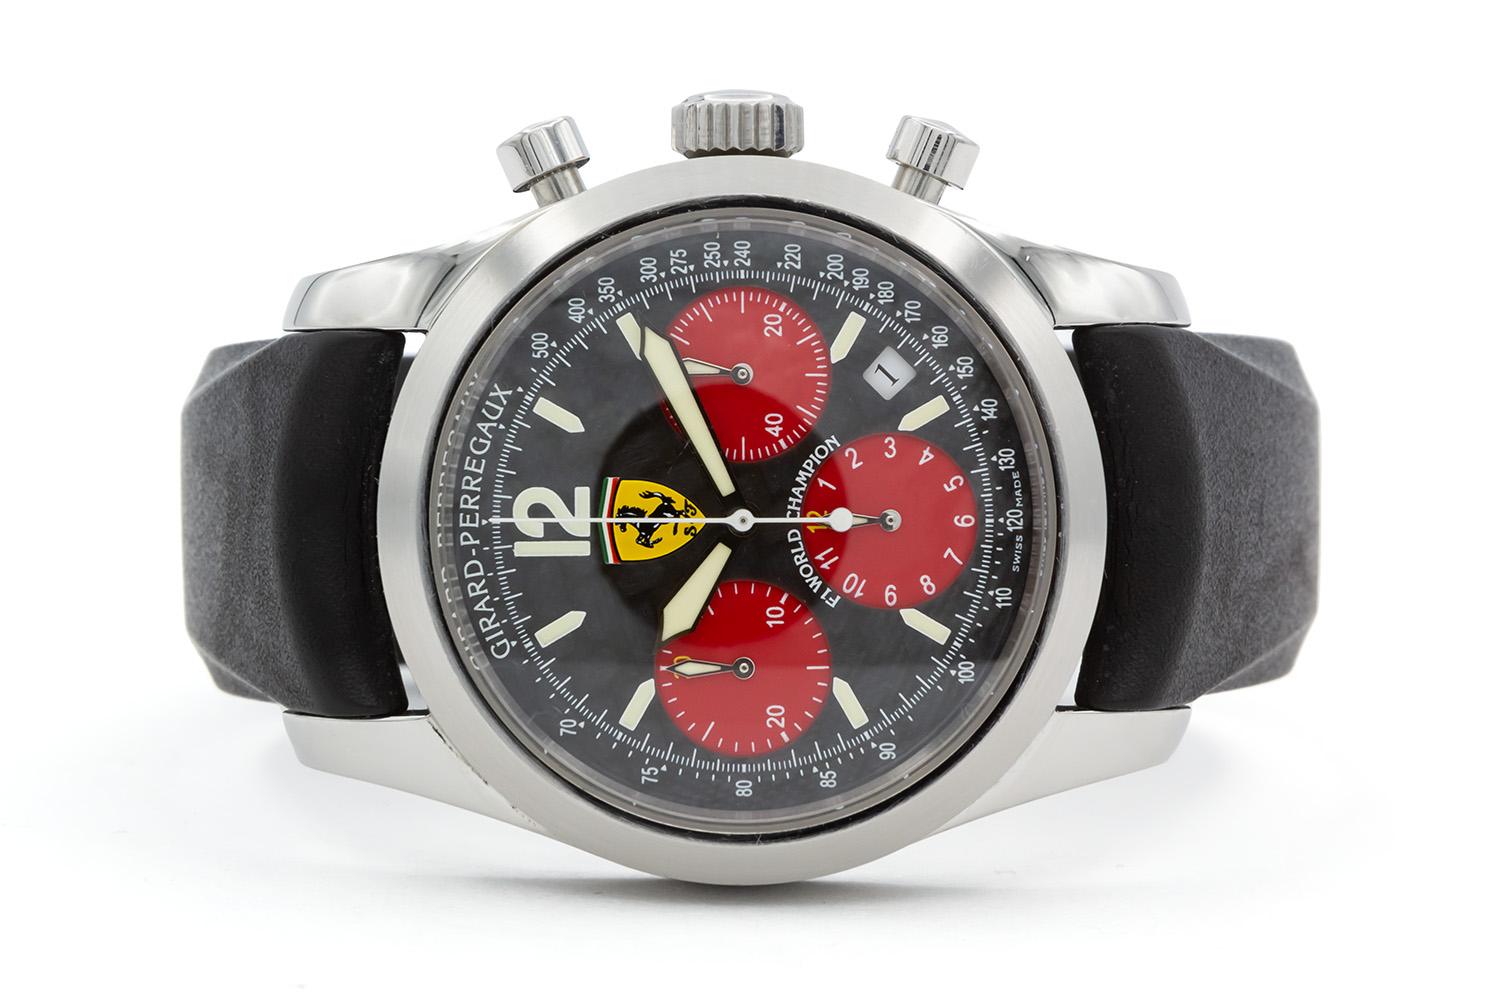 We are pleased to offer this Girard Perregaux Ferrari F1 2002 Championship Chronograph Watch 40mm Ref. 4956. This watch features a stainless steel 40mm case, black carbon fiber dial with red sub dial and date aperture at 4:30, black rubber strap,